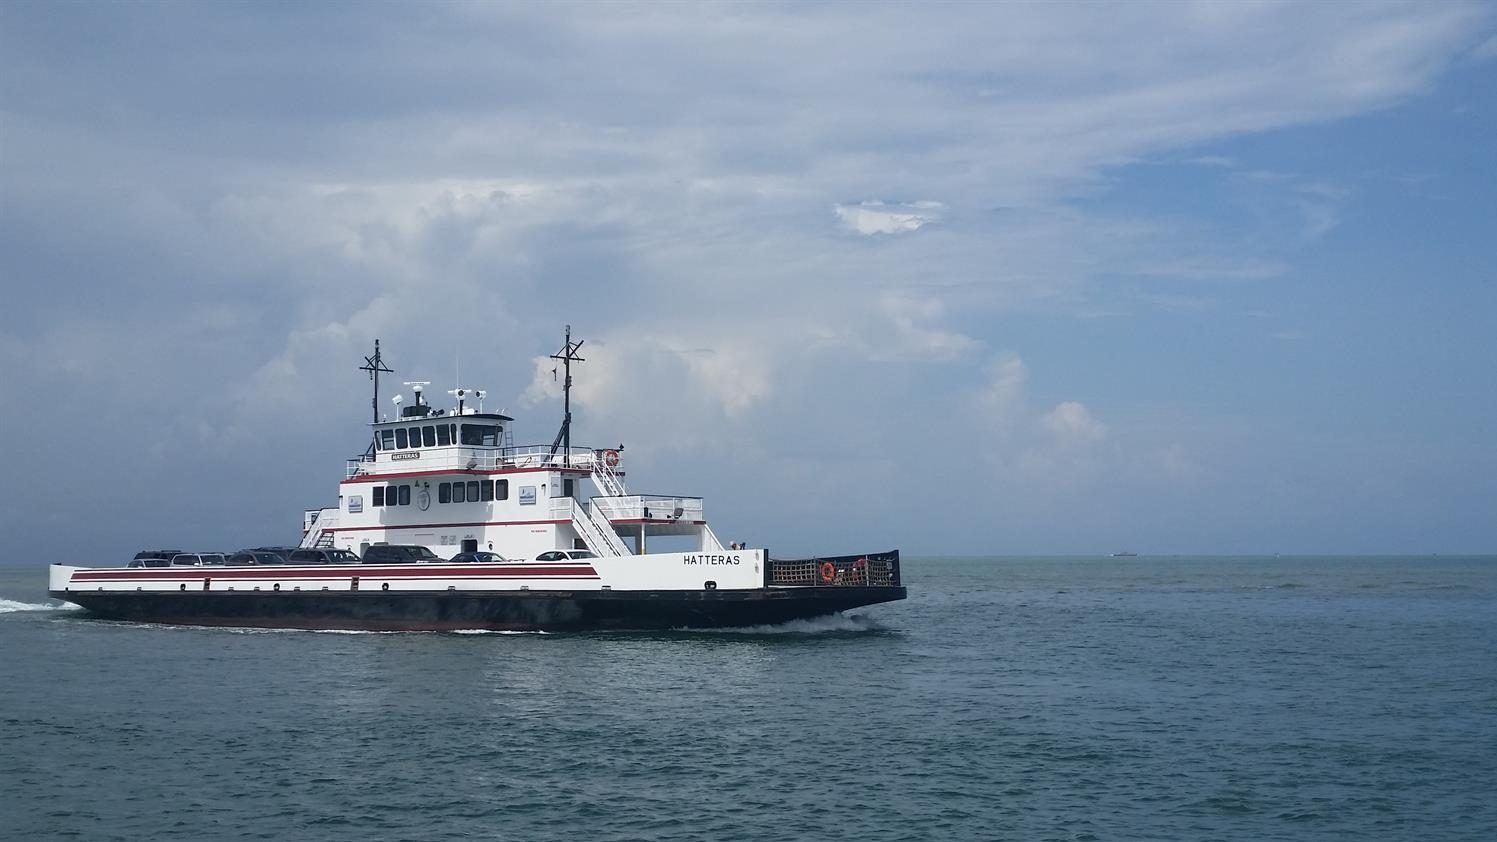 N.C. Ferry Division to host career event in Hatteras on Feb. 28